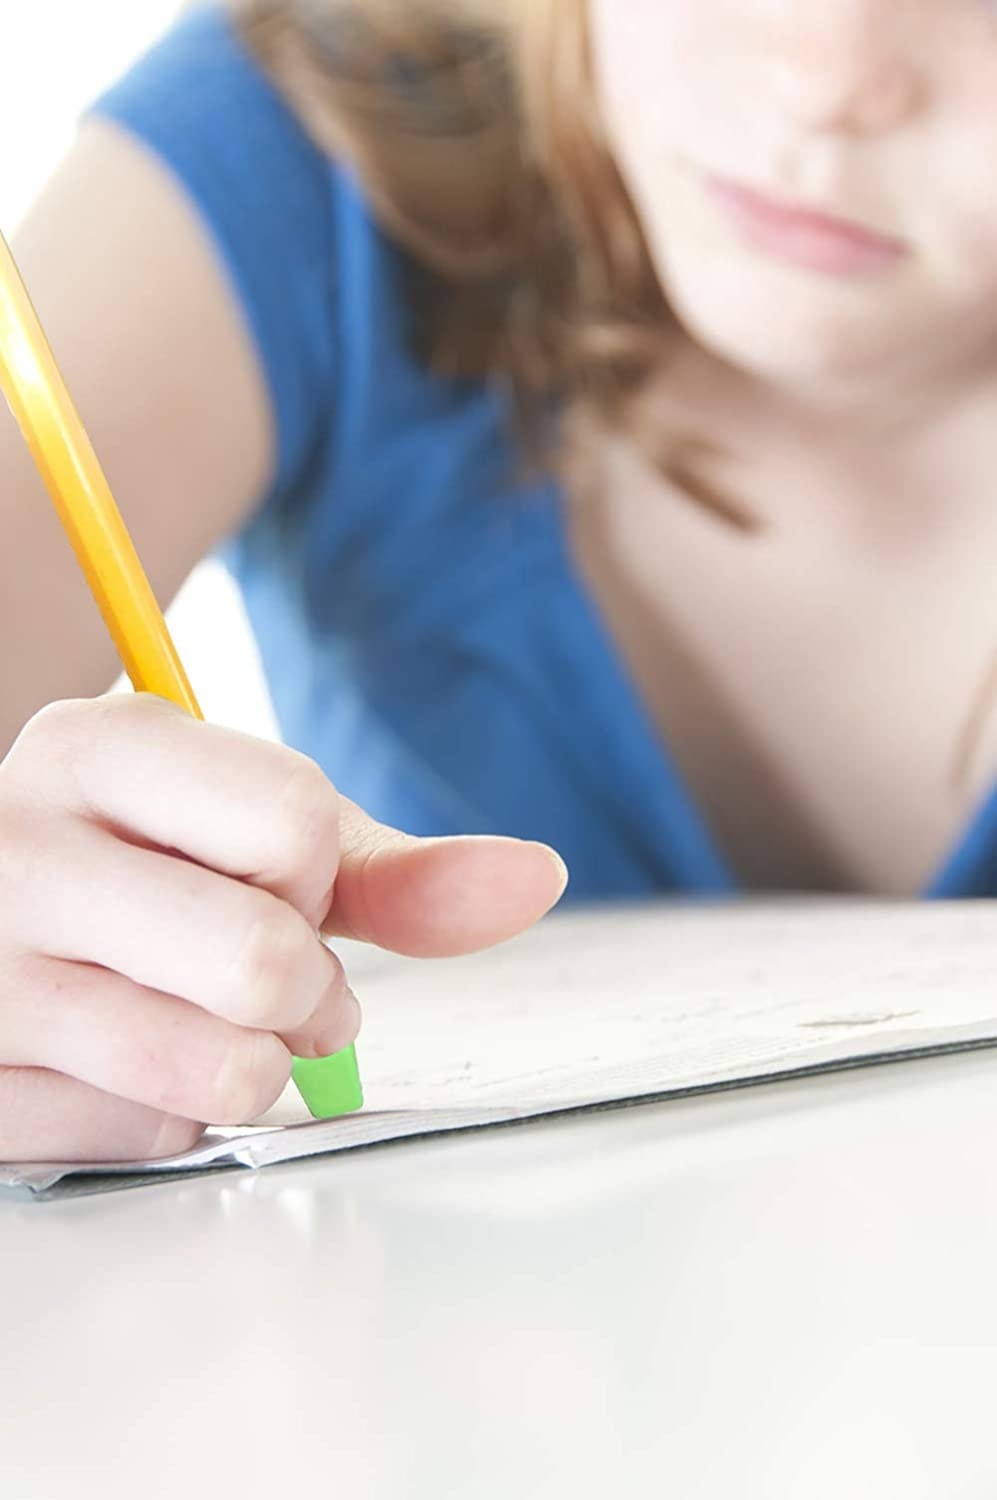 A girl using one of the pencil top erasers